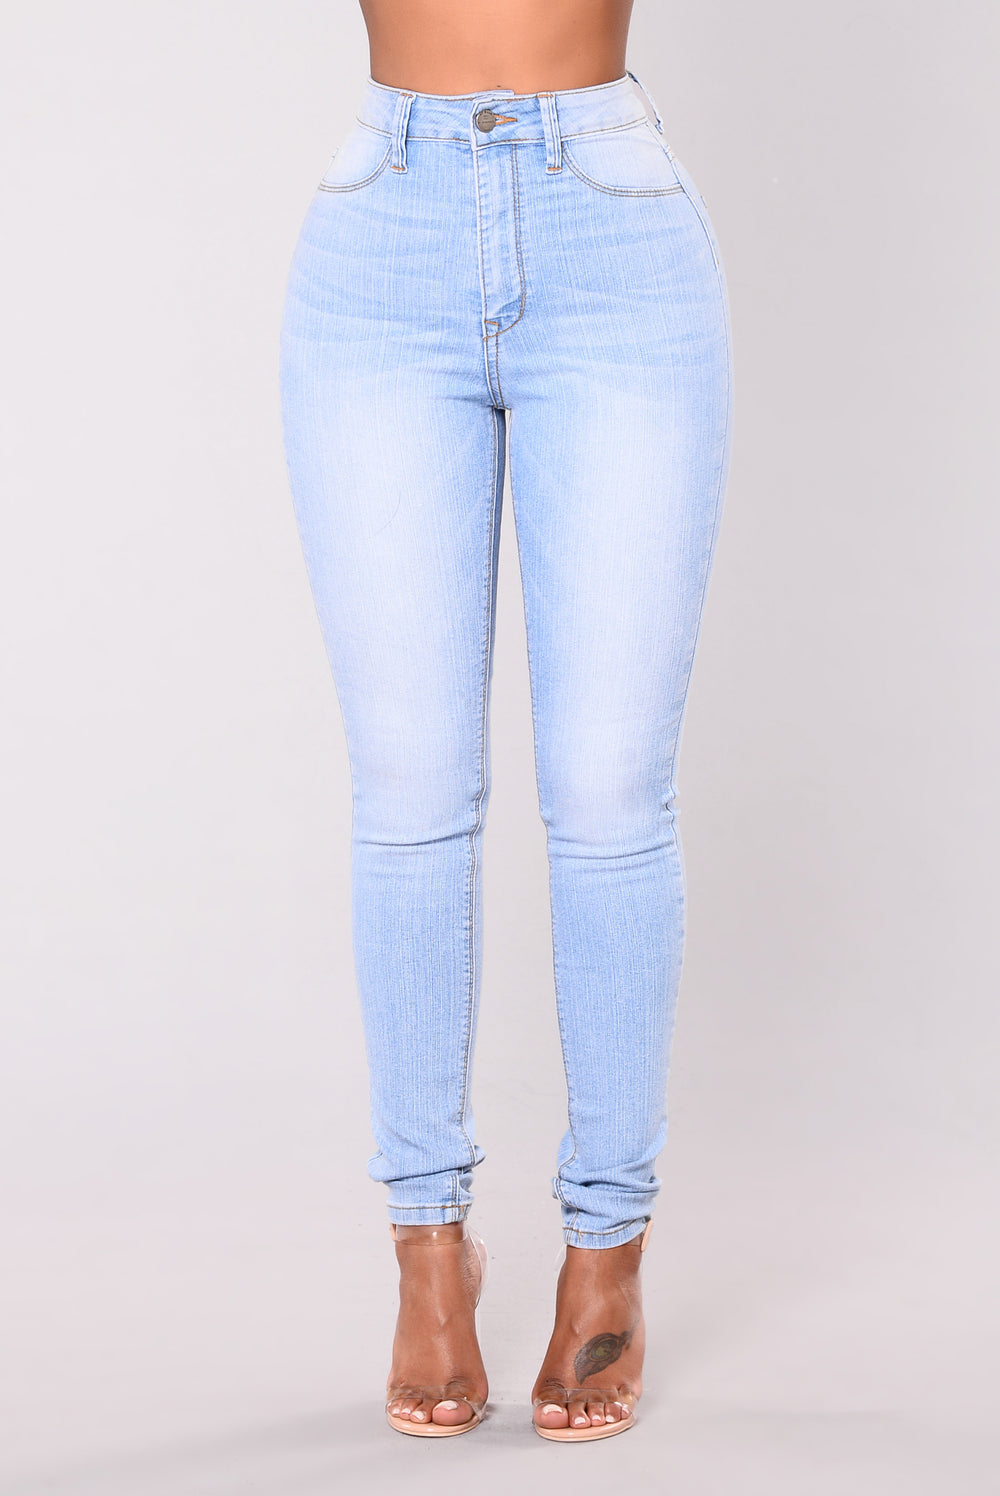 Express Yourself Jeans - Light